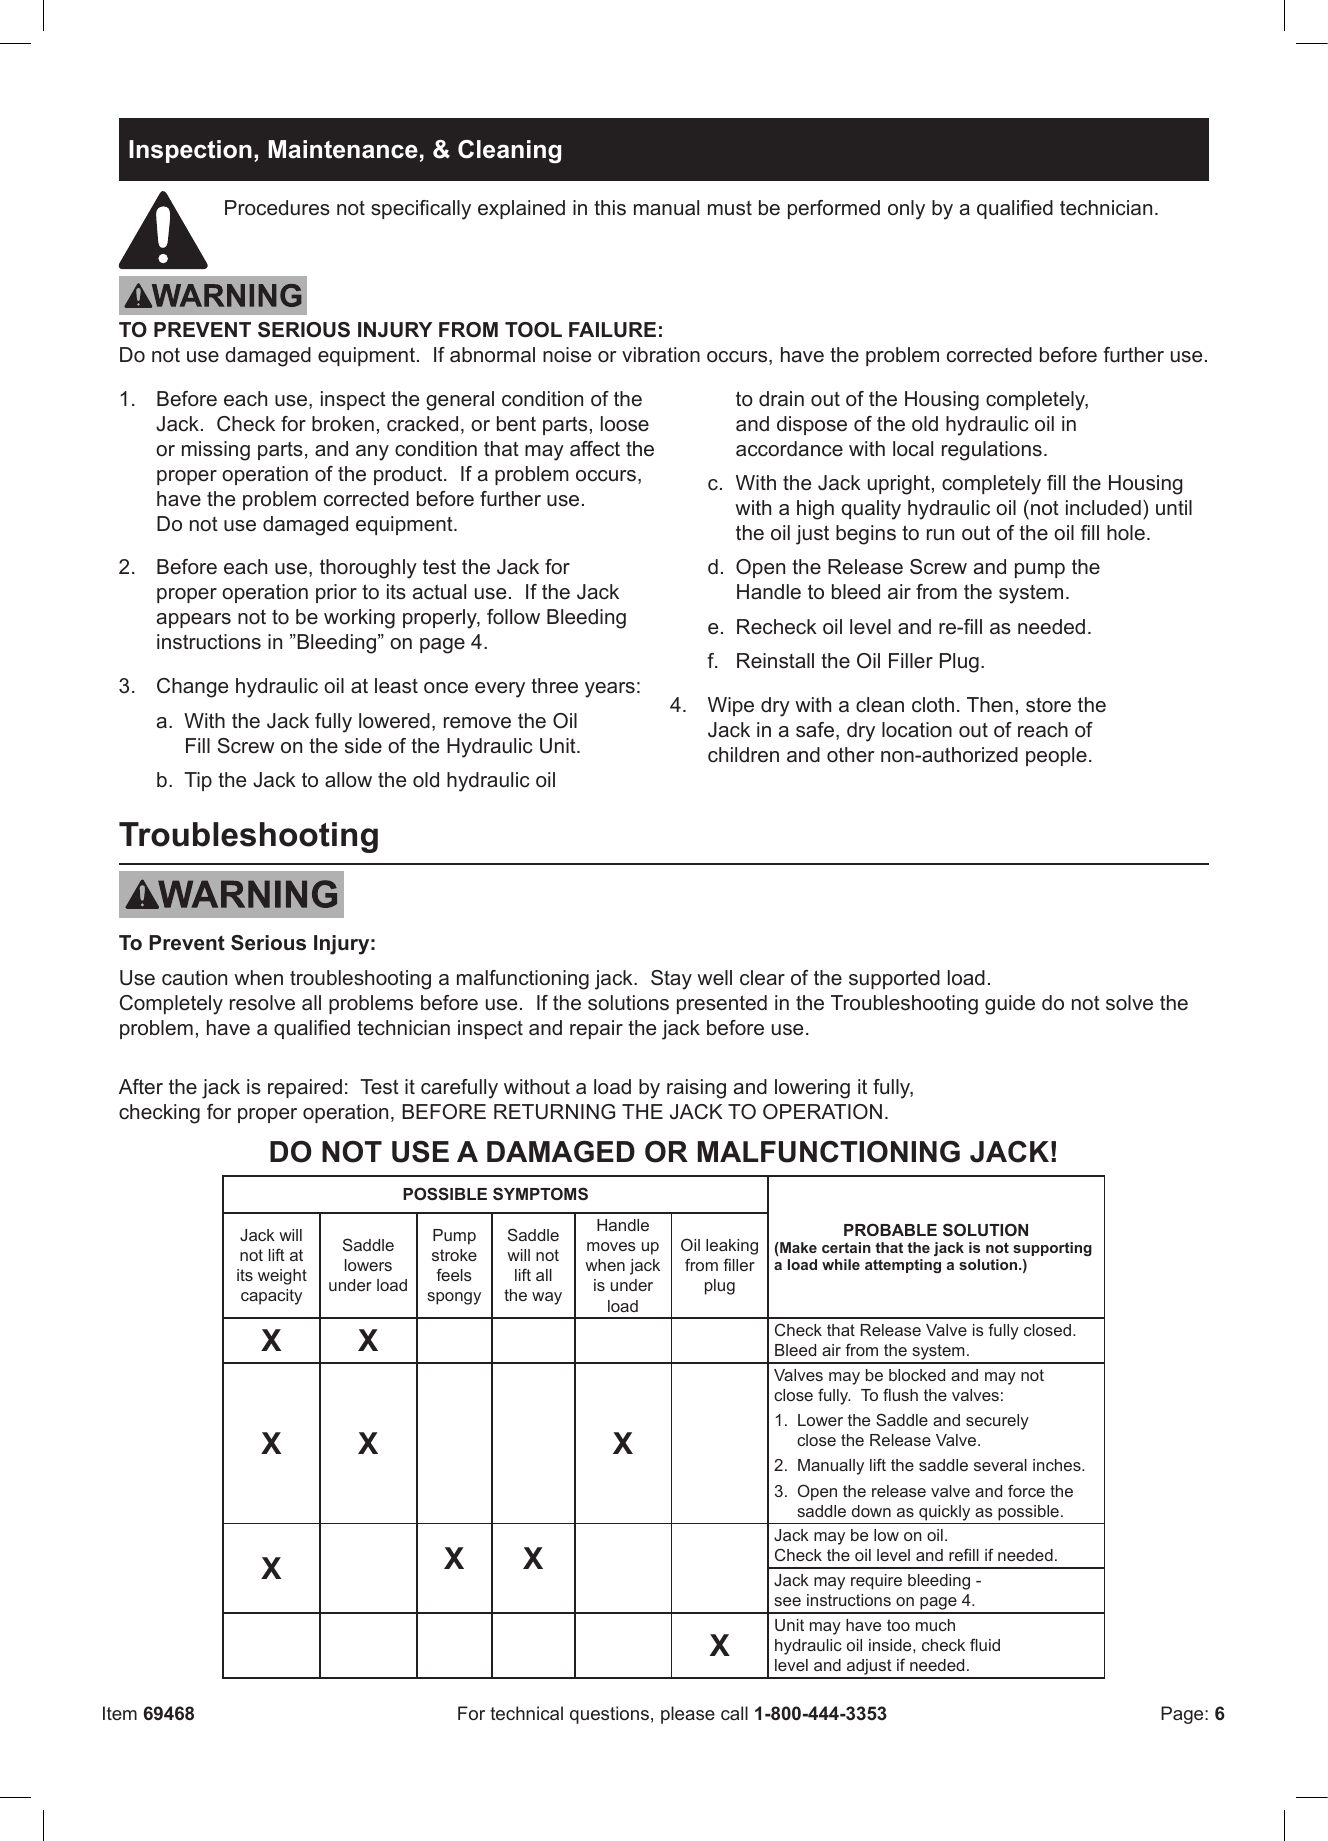 Page 6 of 8 - Harbor-Freight Harbor-Freight-69468-Owner-S-Manual